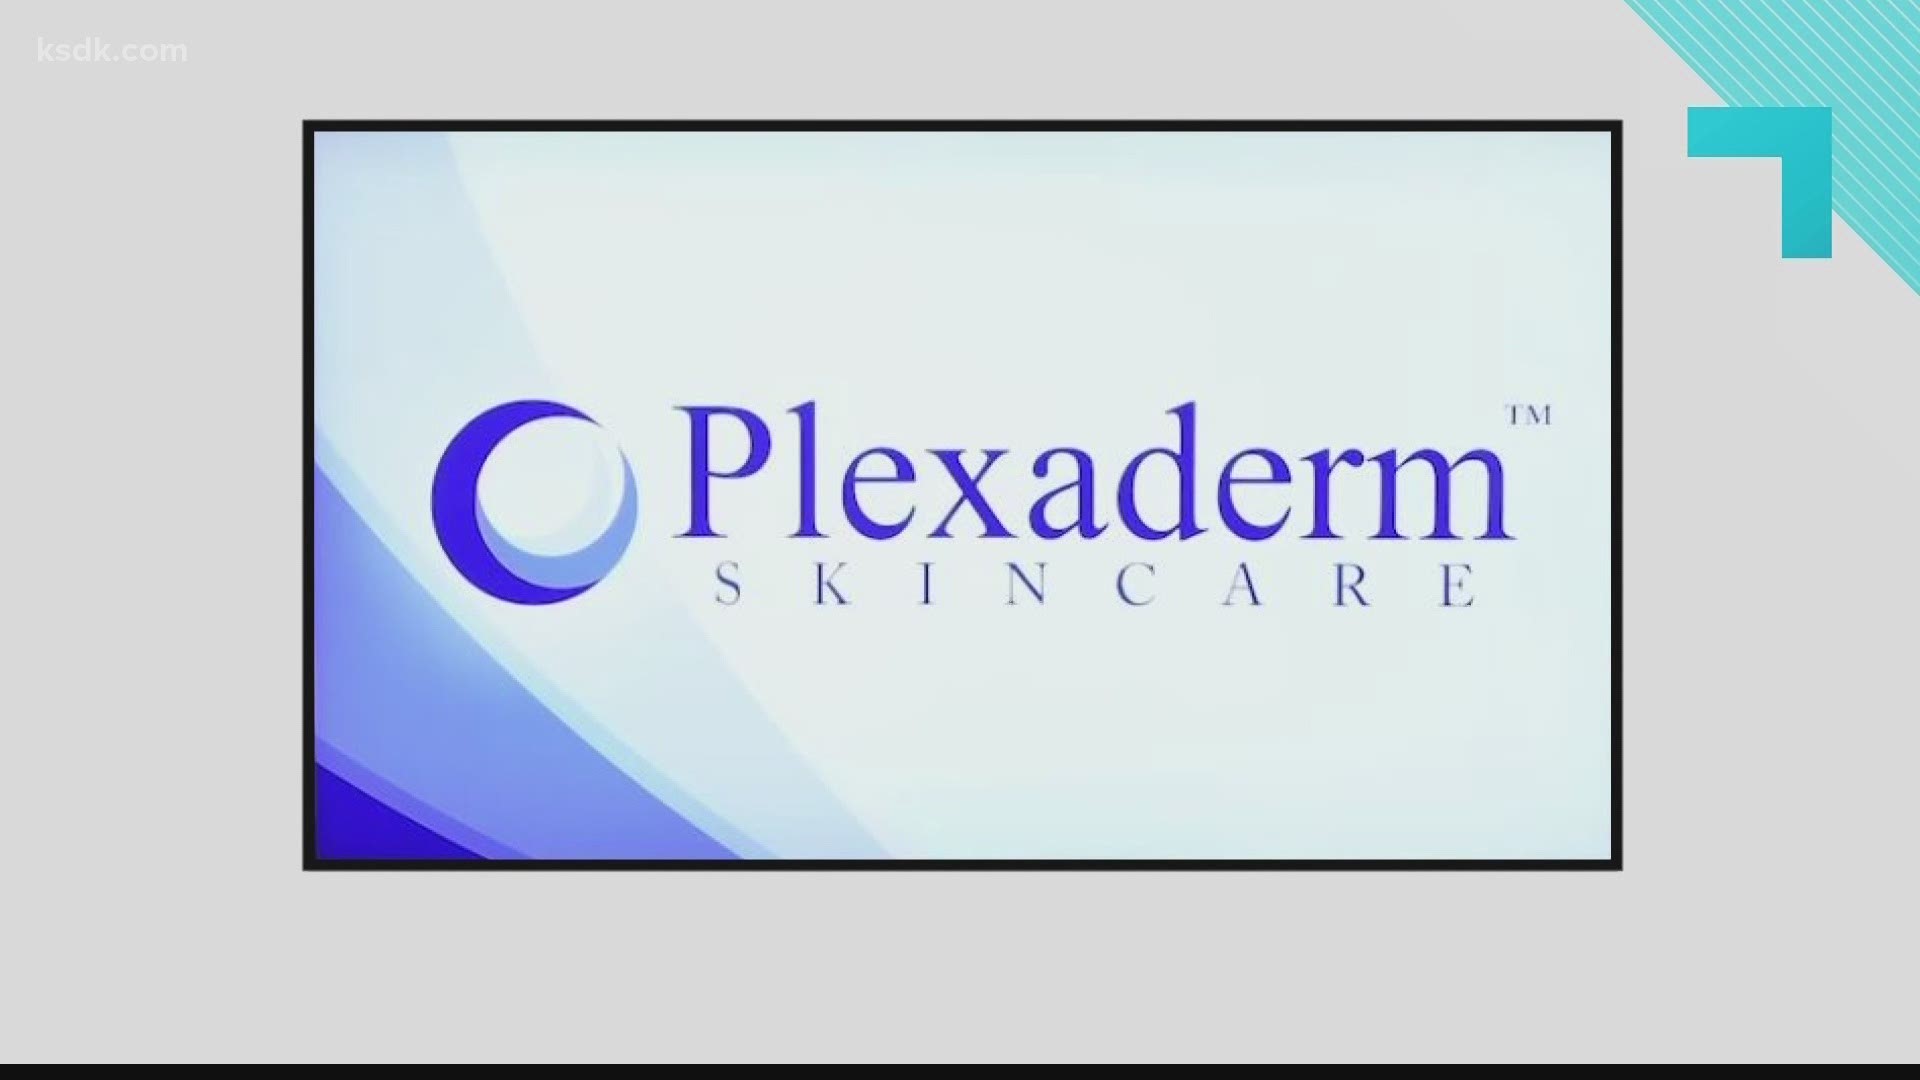 Plexaderm is a serum that can shrink your undereye bags and wrinkles!